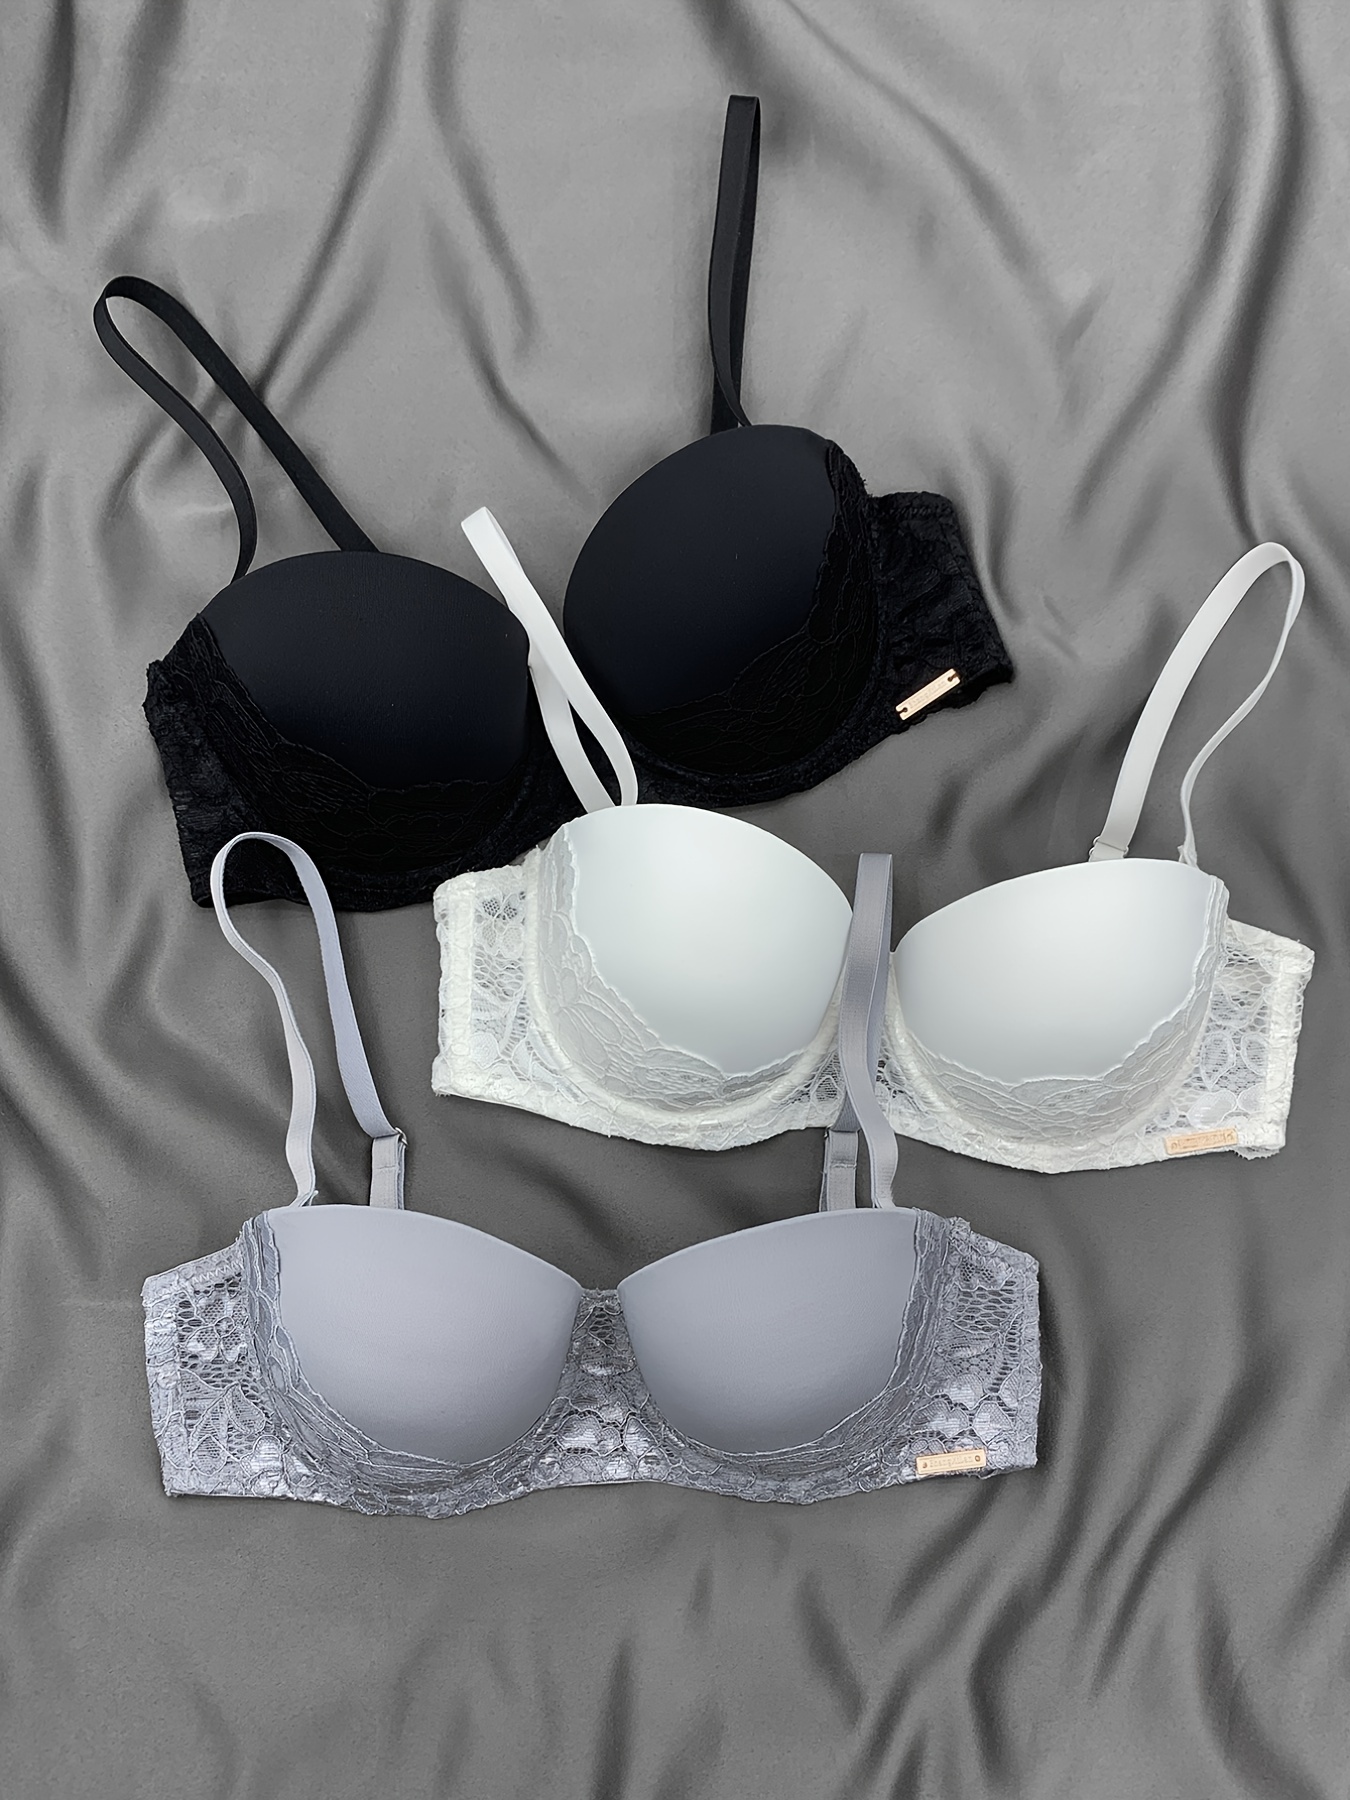 Ladies, get ready for lingerie that looks good and feels good! Shop  seamfree bralettes from 119.95, and 3-pack seamfree panties from 129.95,  sizes